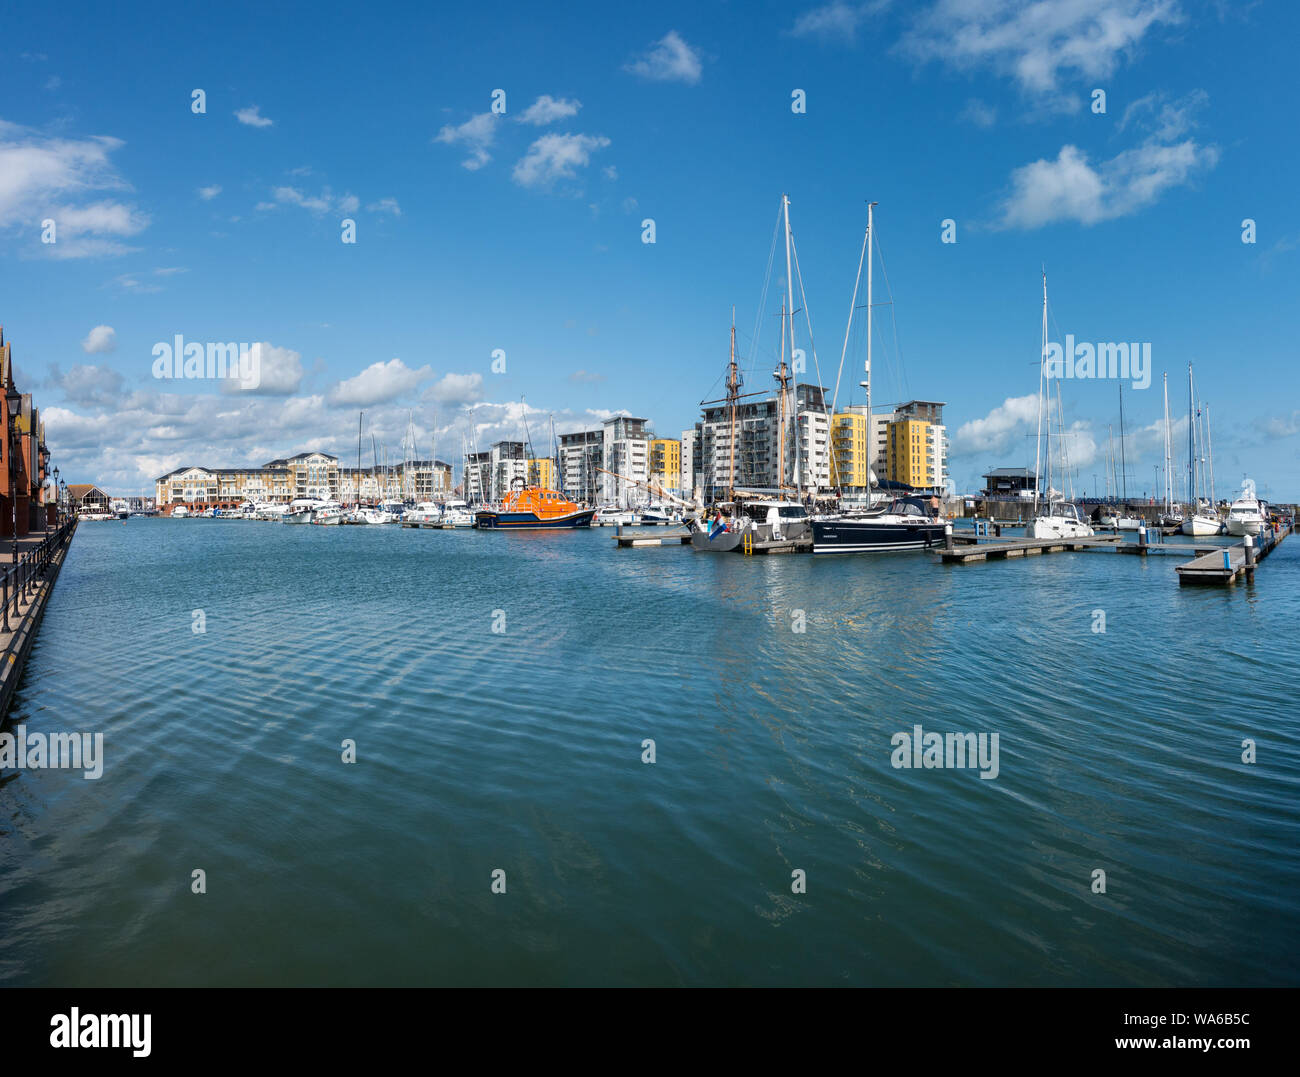 Waterside apartments and moored boats, Sovereign Harbour, Eastbourne, East Sussex, England,UK Stock Photo